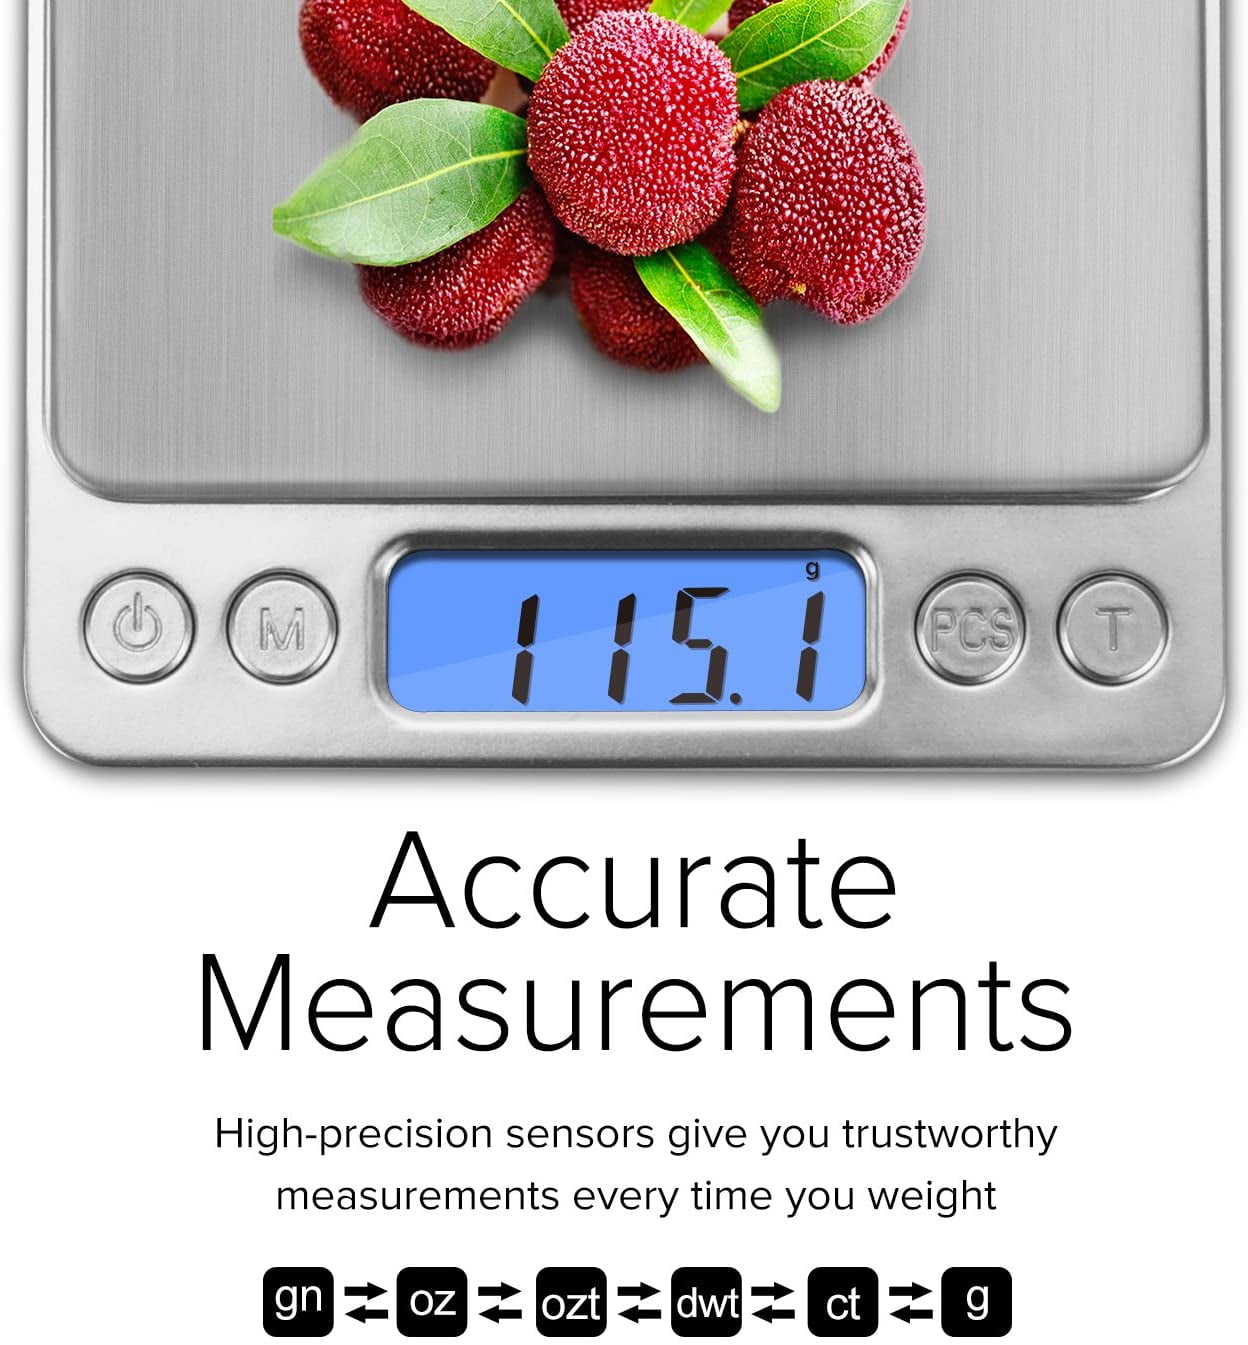 3000g-0.1g Small Digital Kitchen Food Diet Electronic Weight Scale + Manual